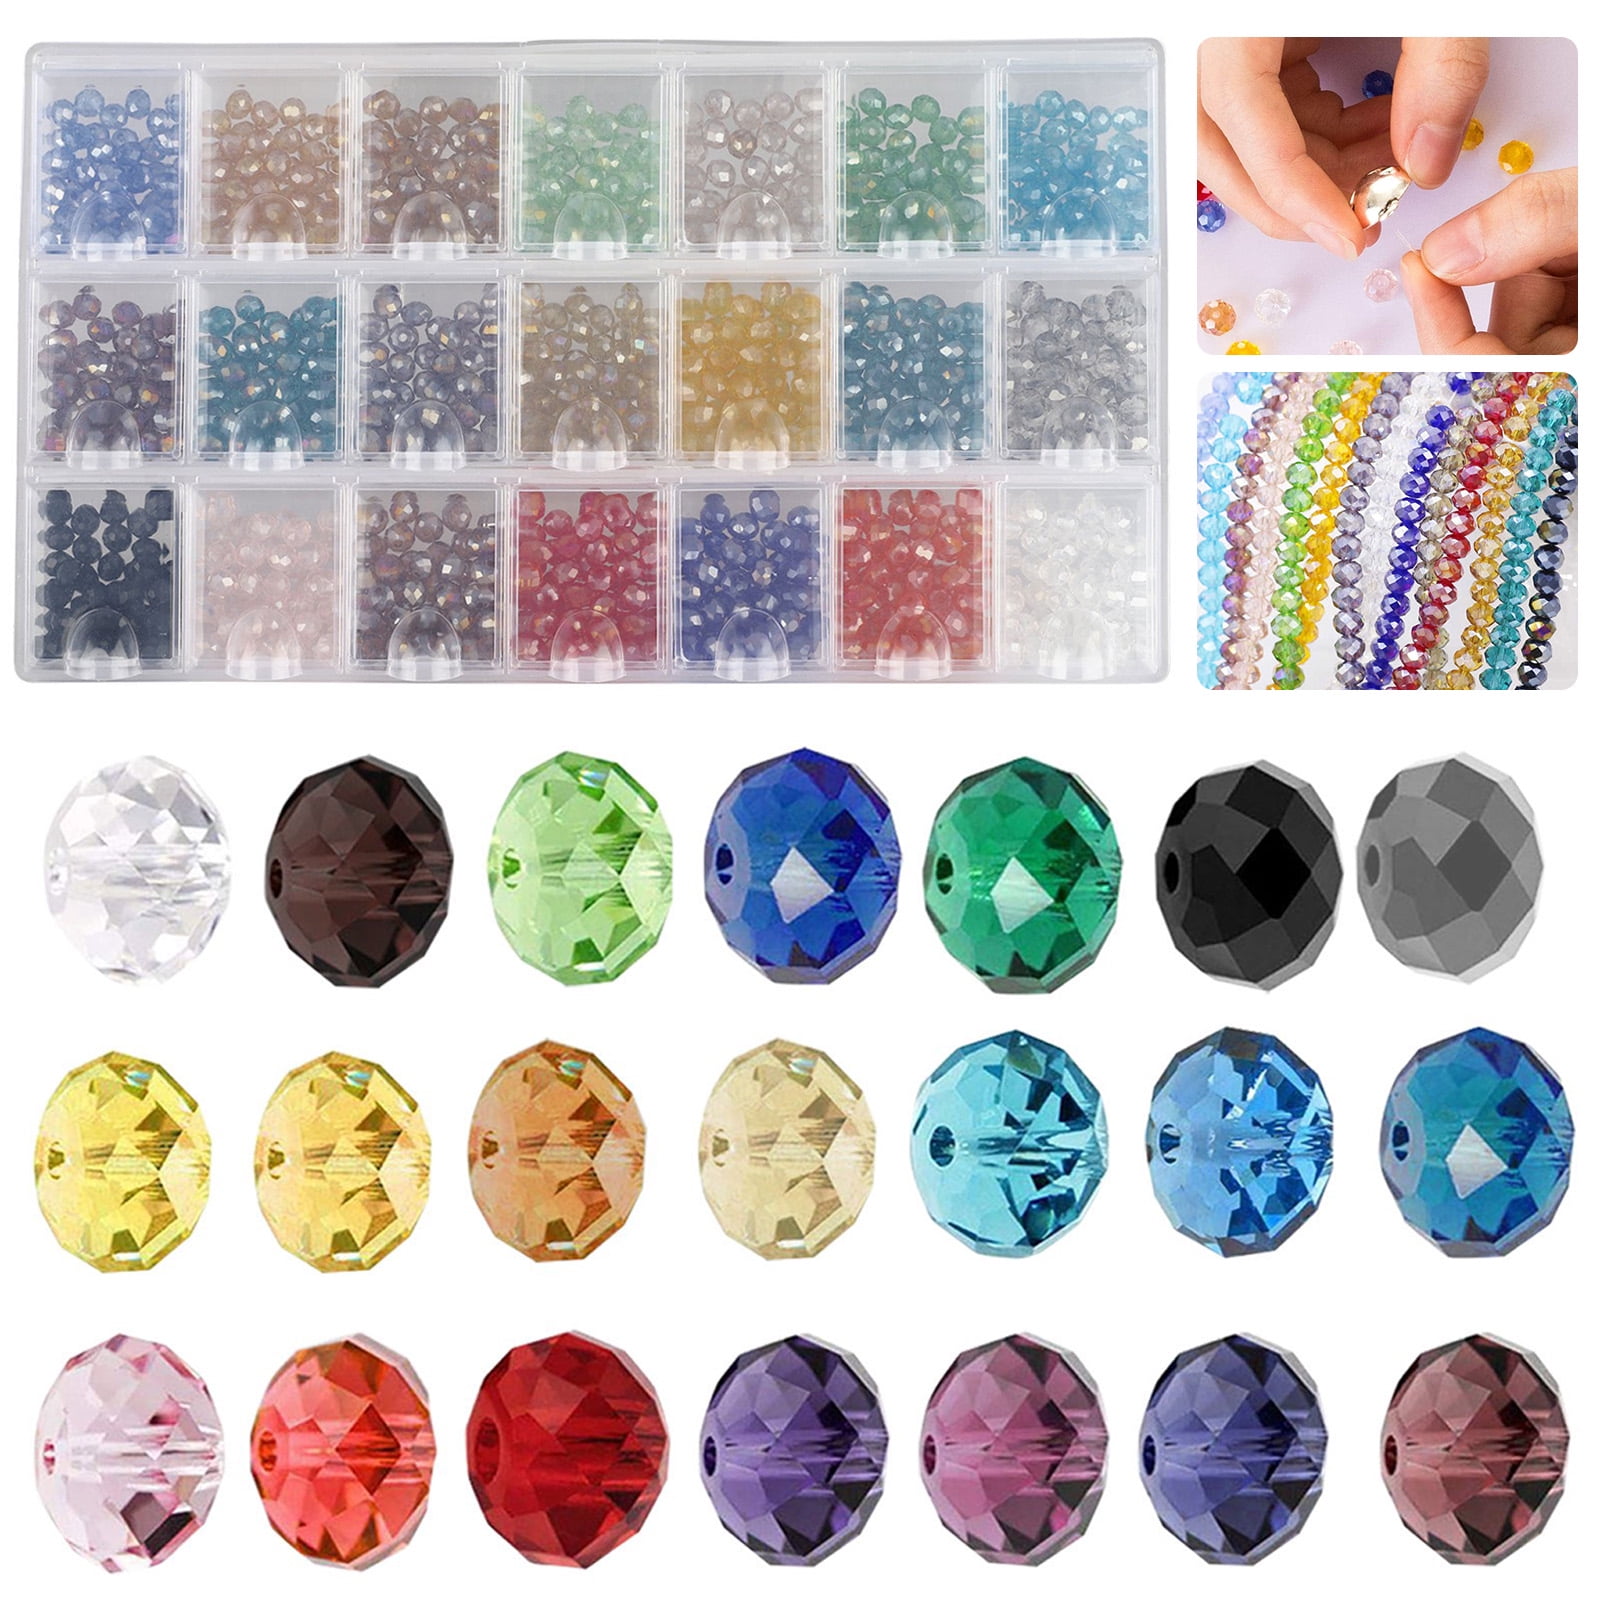 100pcs 8mm Mixed Faceted Glass Crystal Rondelle Spacer Loose Bead,about 20 color 